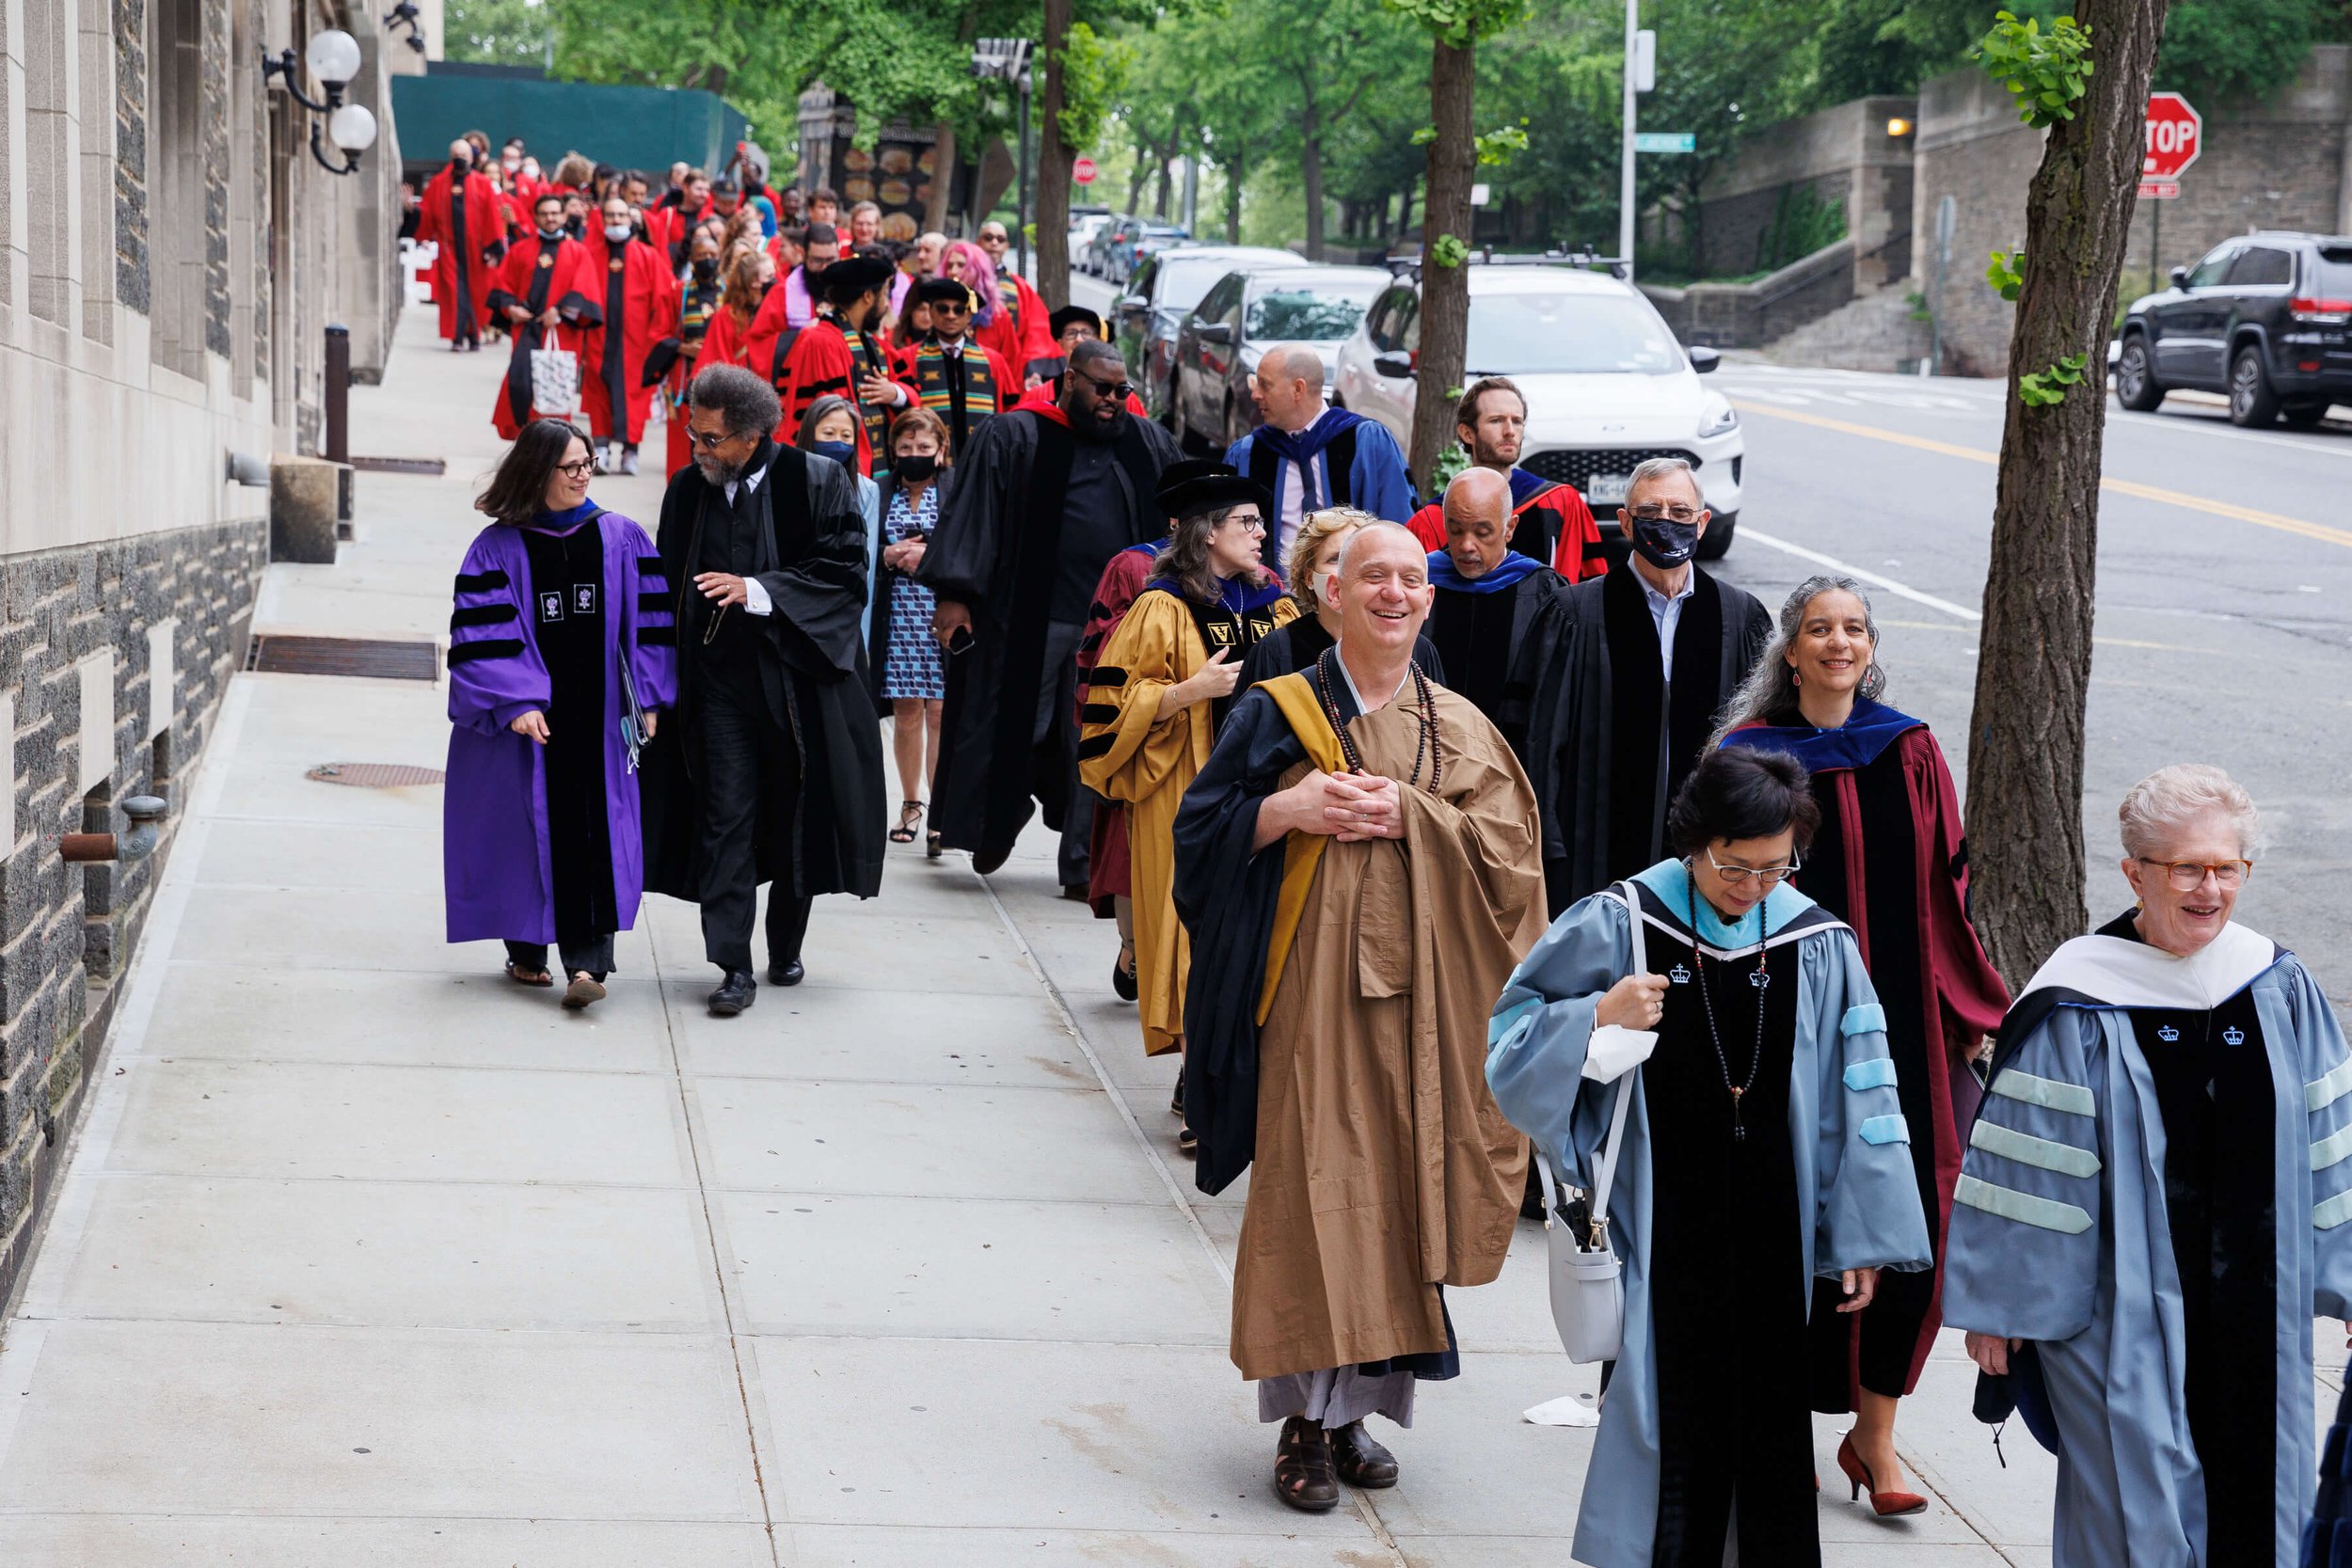 The faculty lead the procession.